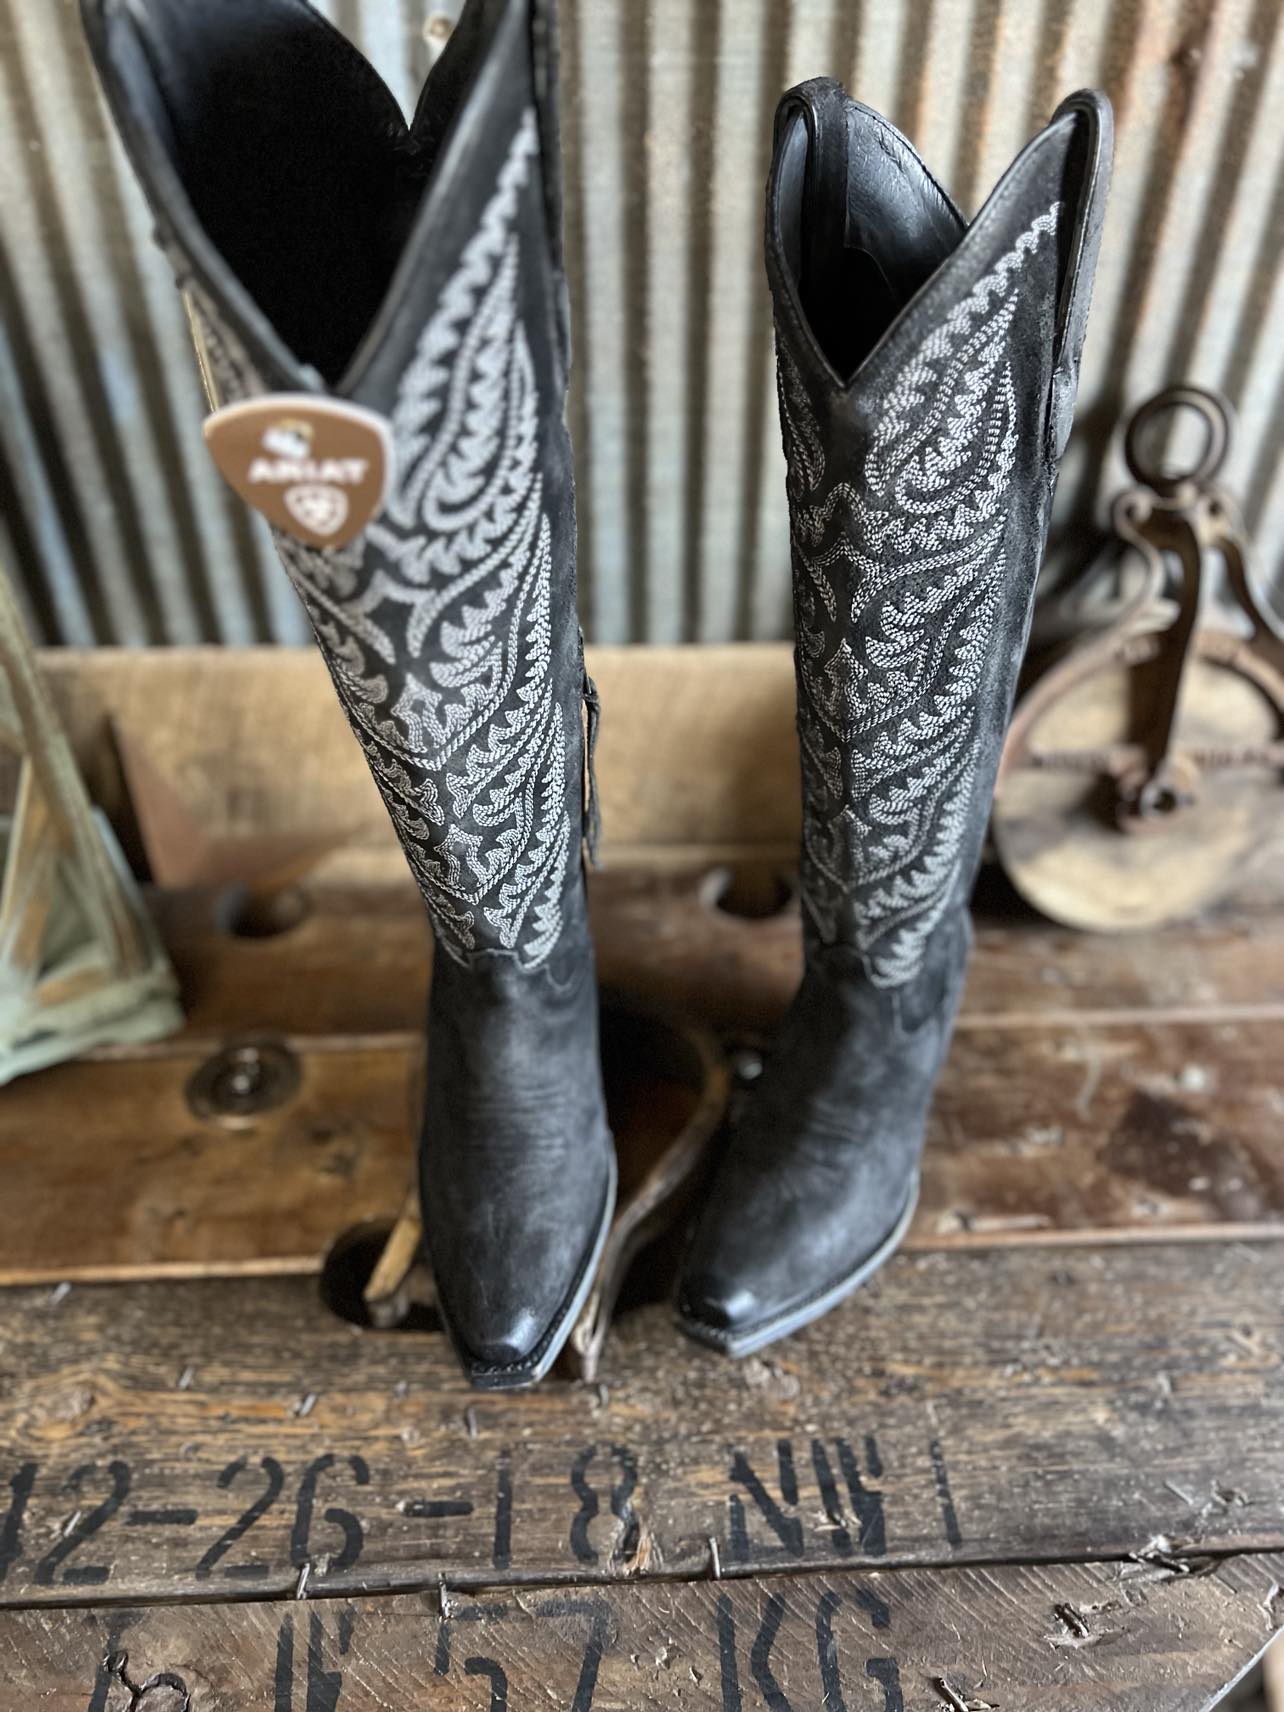 Women's Ariat Laramie Boots-Women's Boots-Ariat-Lucky J Boots & More, Women's, Men's, & Kids Western Store Located in Carthage, MO